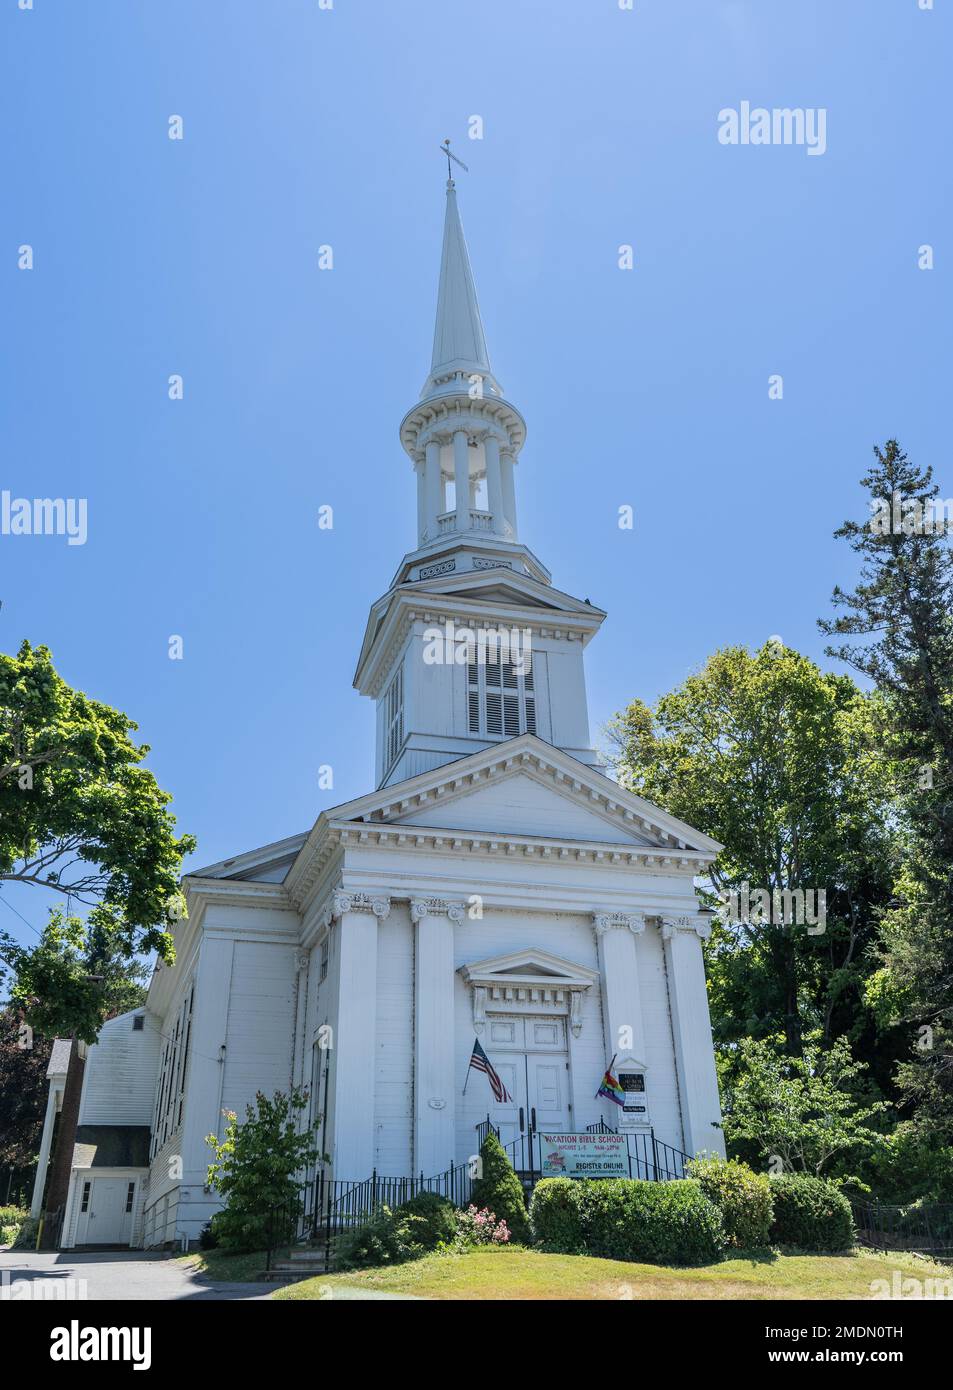 Sandwich, Massachusetts- July 9, 2022: First Church of Christ Sandwich, Massachusetts is one of the oldest churches on Cape Cod. This church was featu Stock Photo